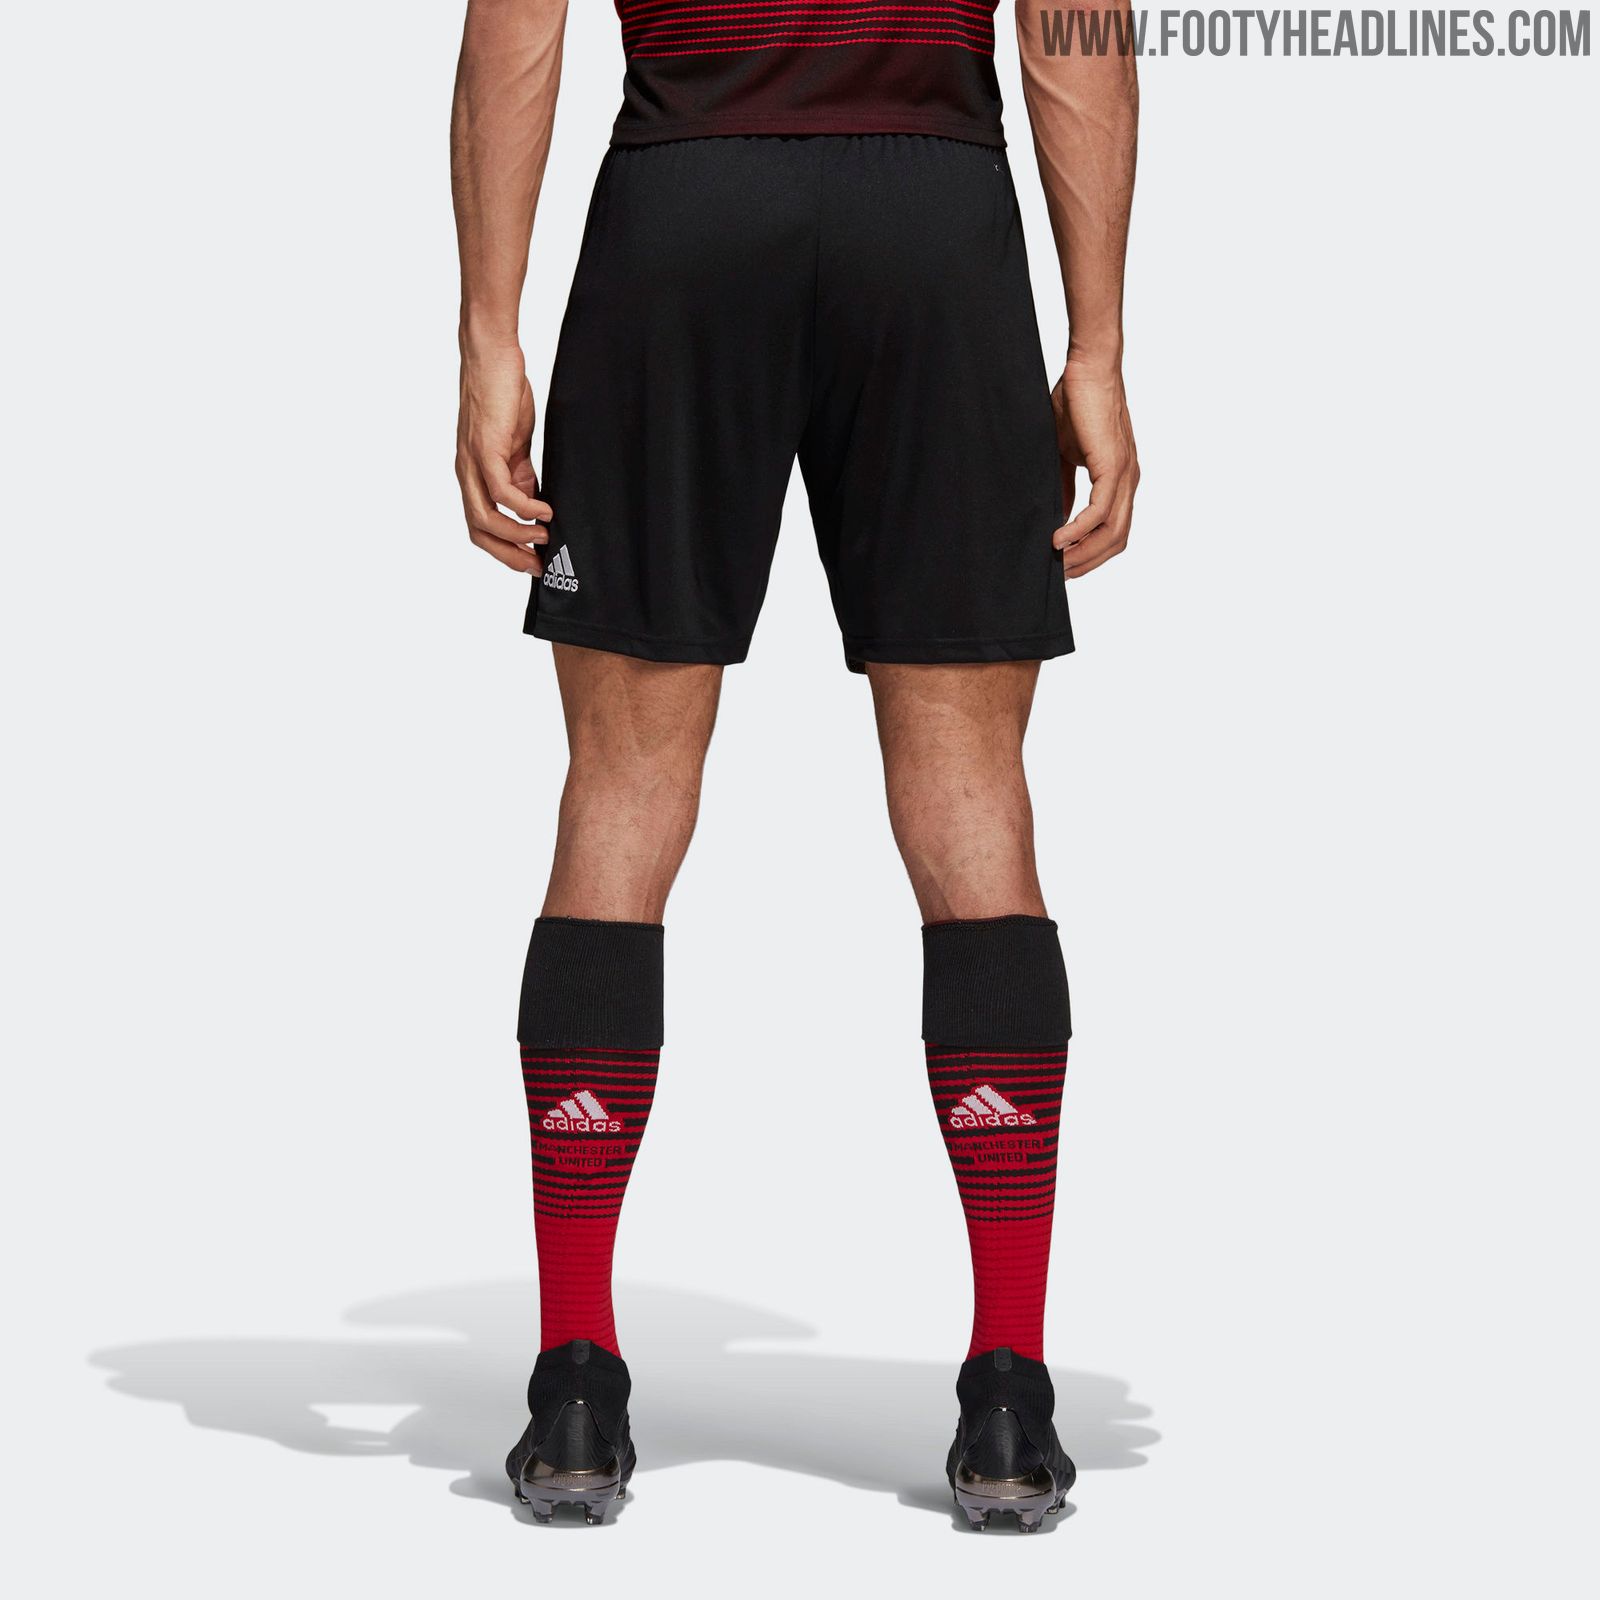 Manchester United 18-19 Home Kit Revealed - Footy Headlines